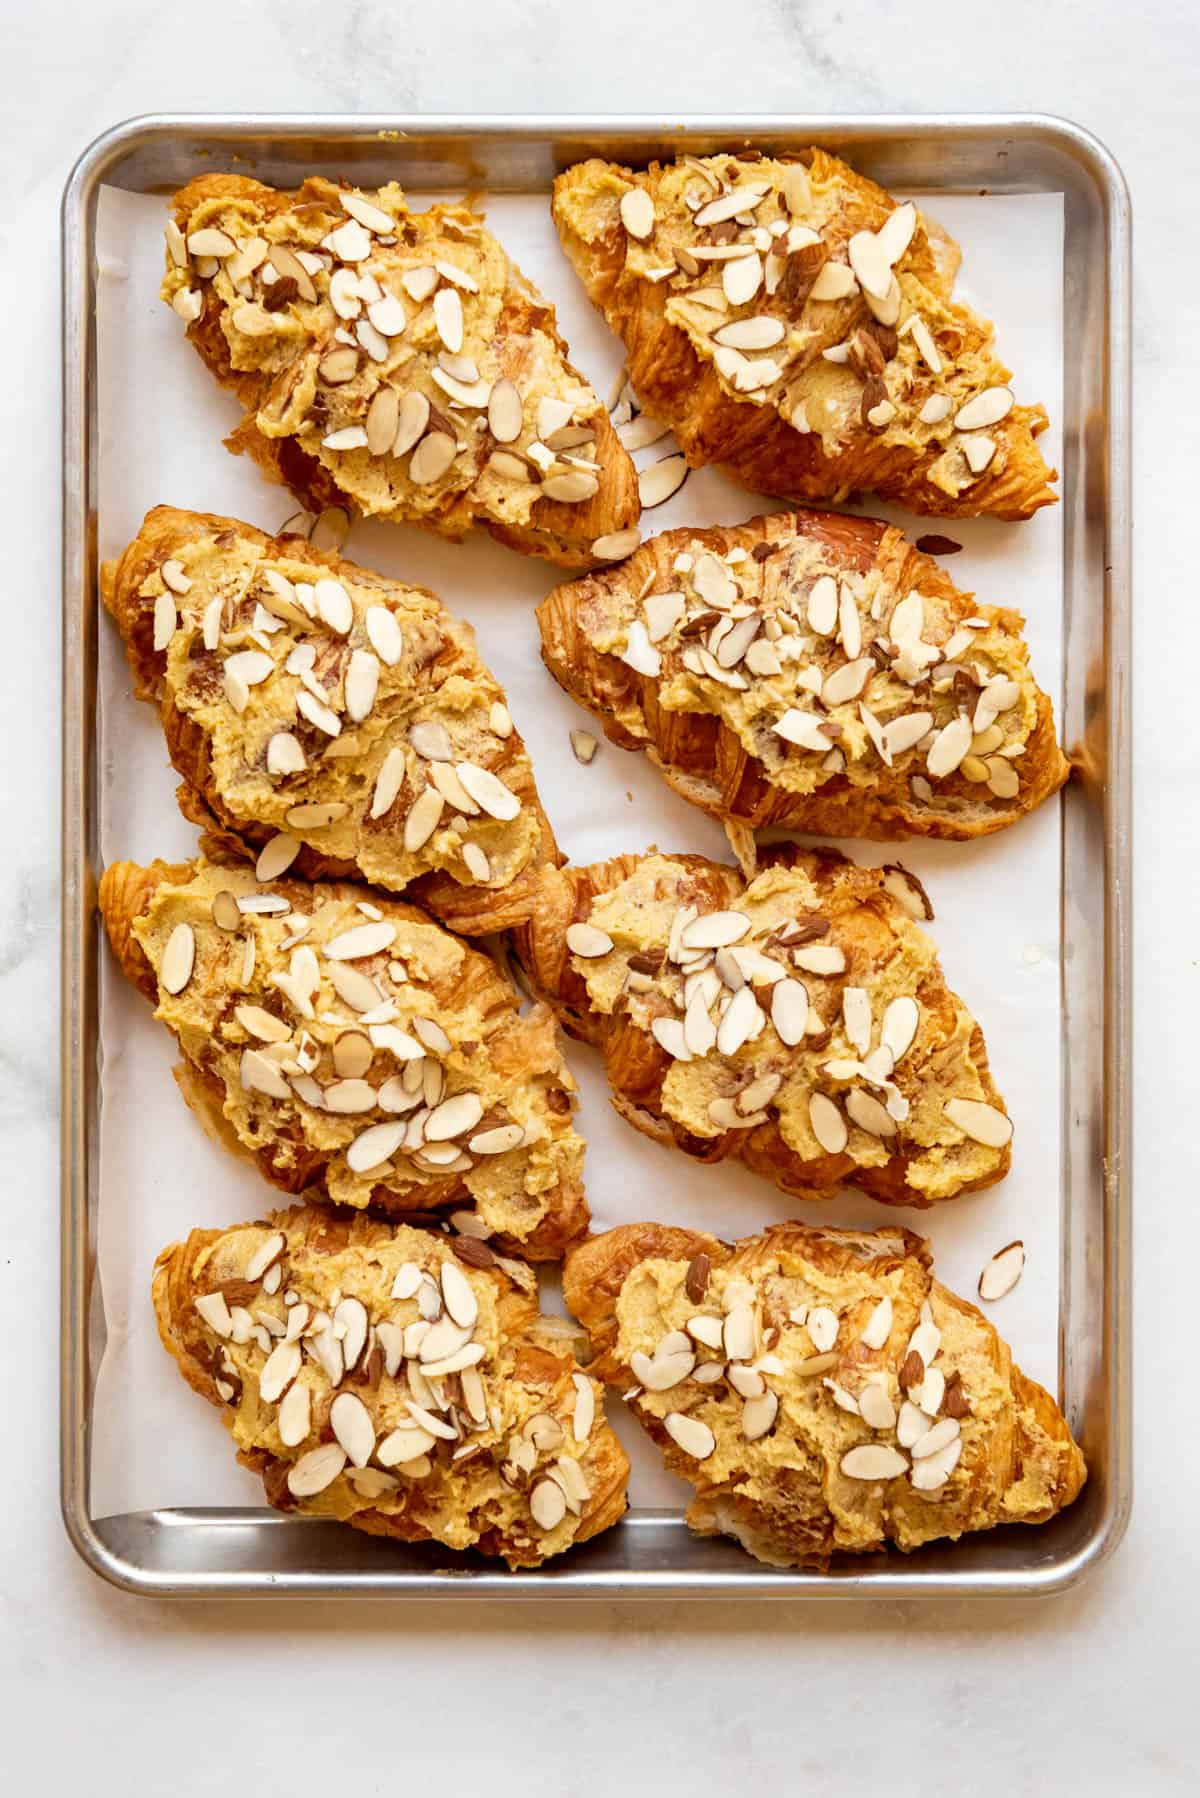 Sprinkling sliced almonds on top of almond croissants on a baking sheet.